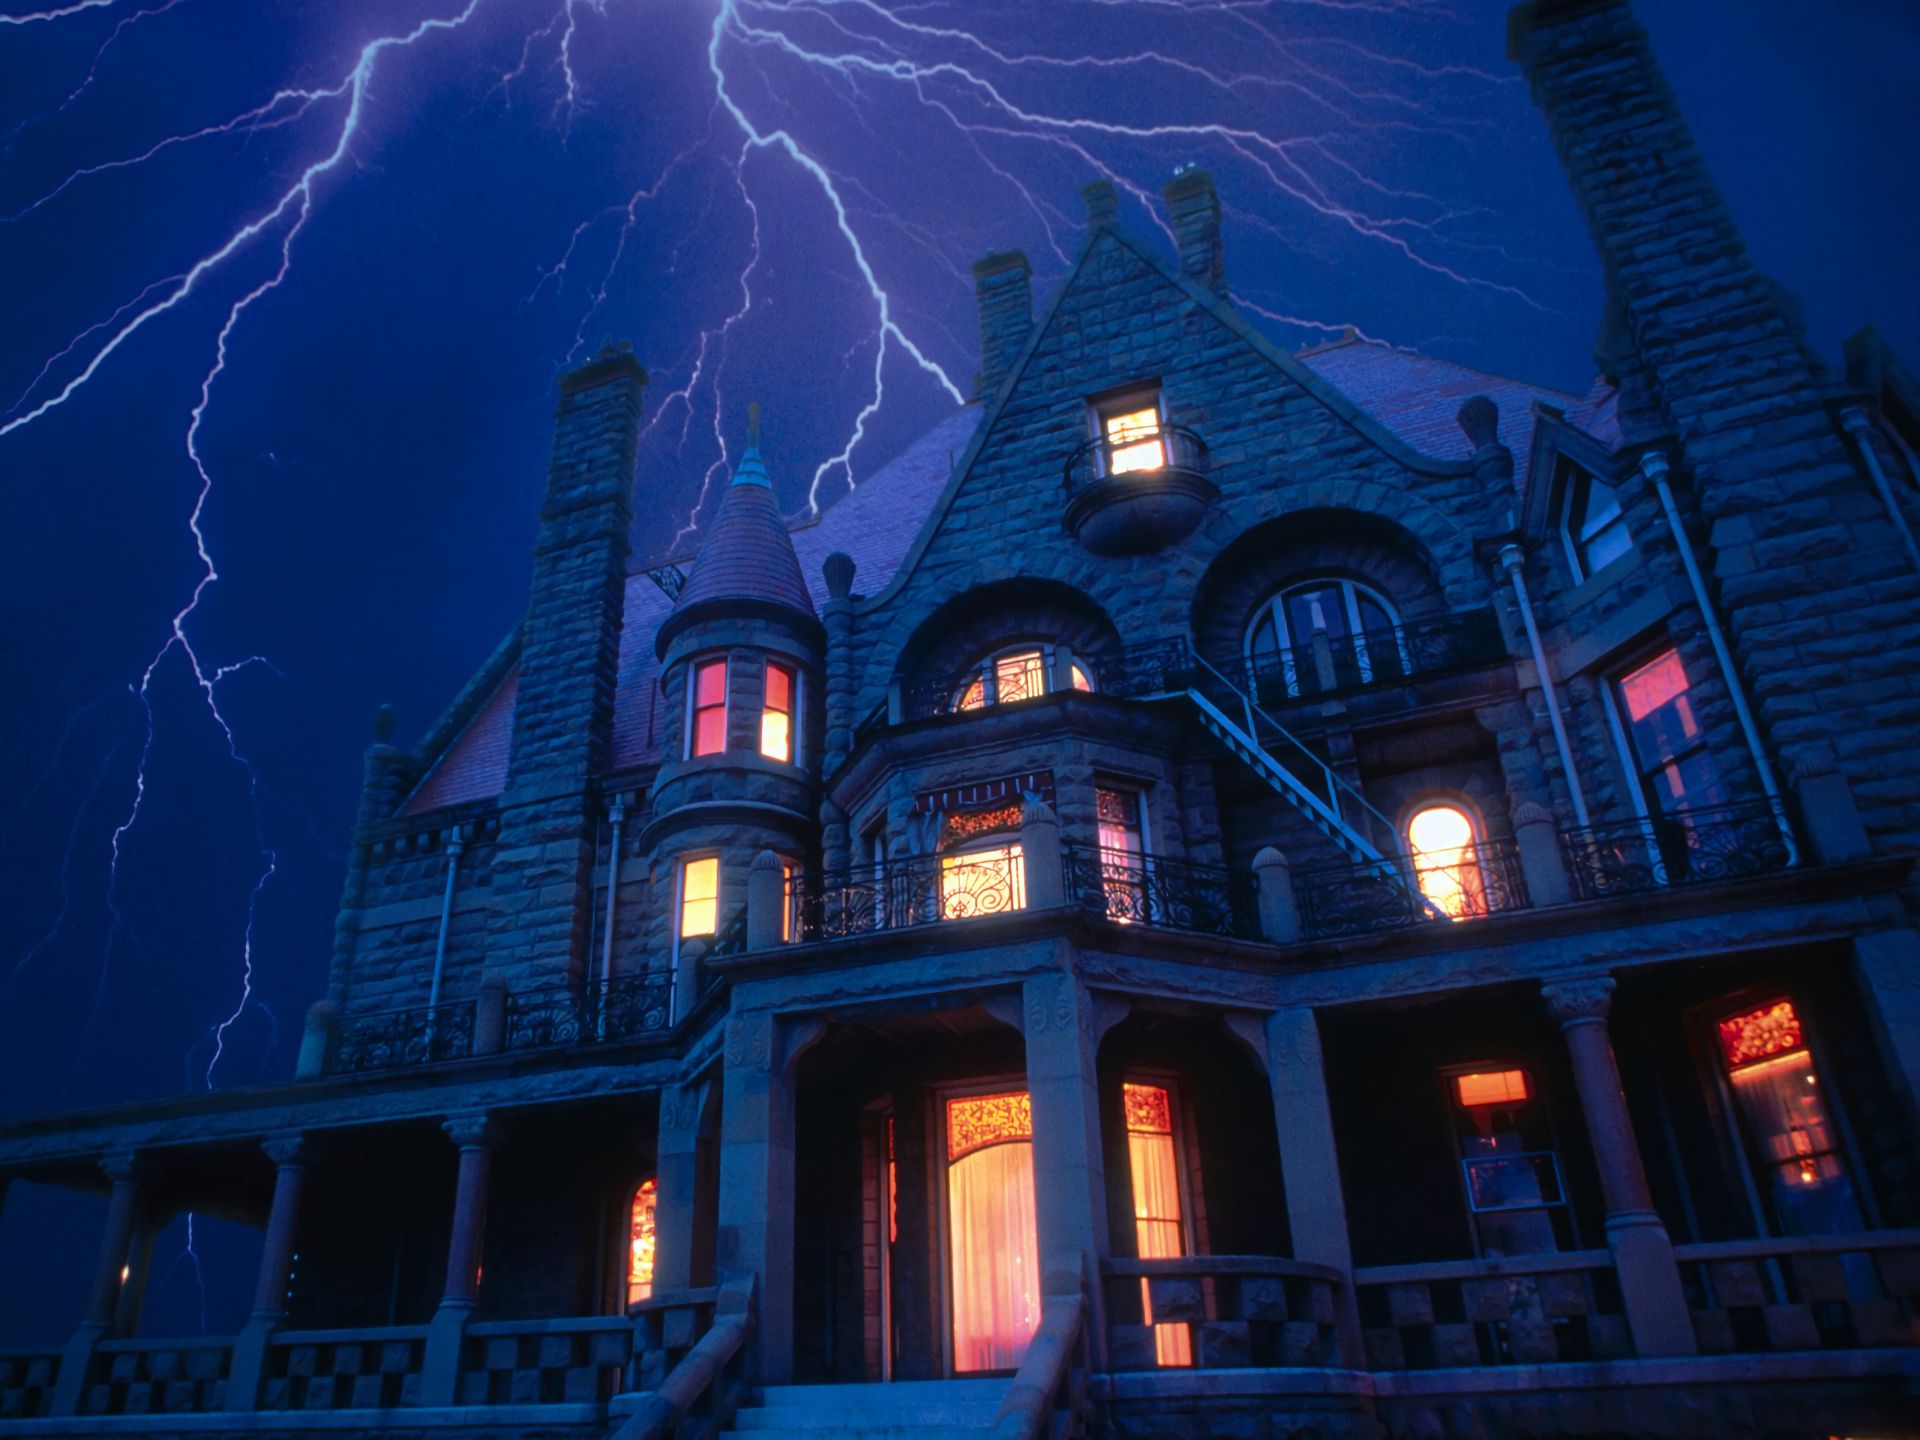 Haunted House wallpapers for desktop, download free Haunted House pictures  and backgrounds for PC 